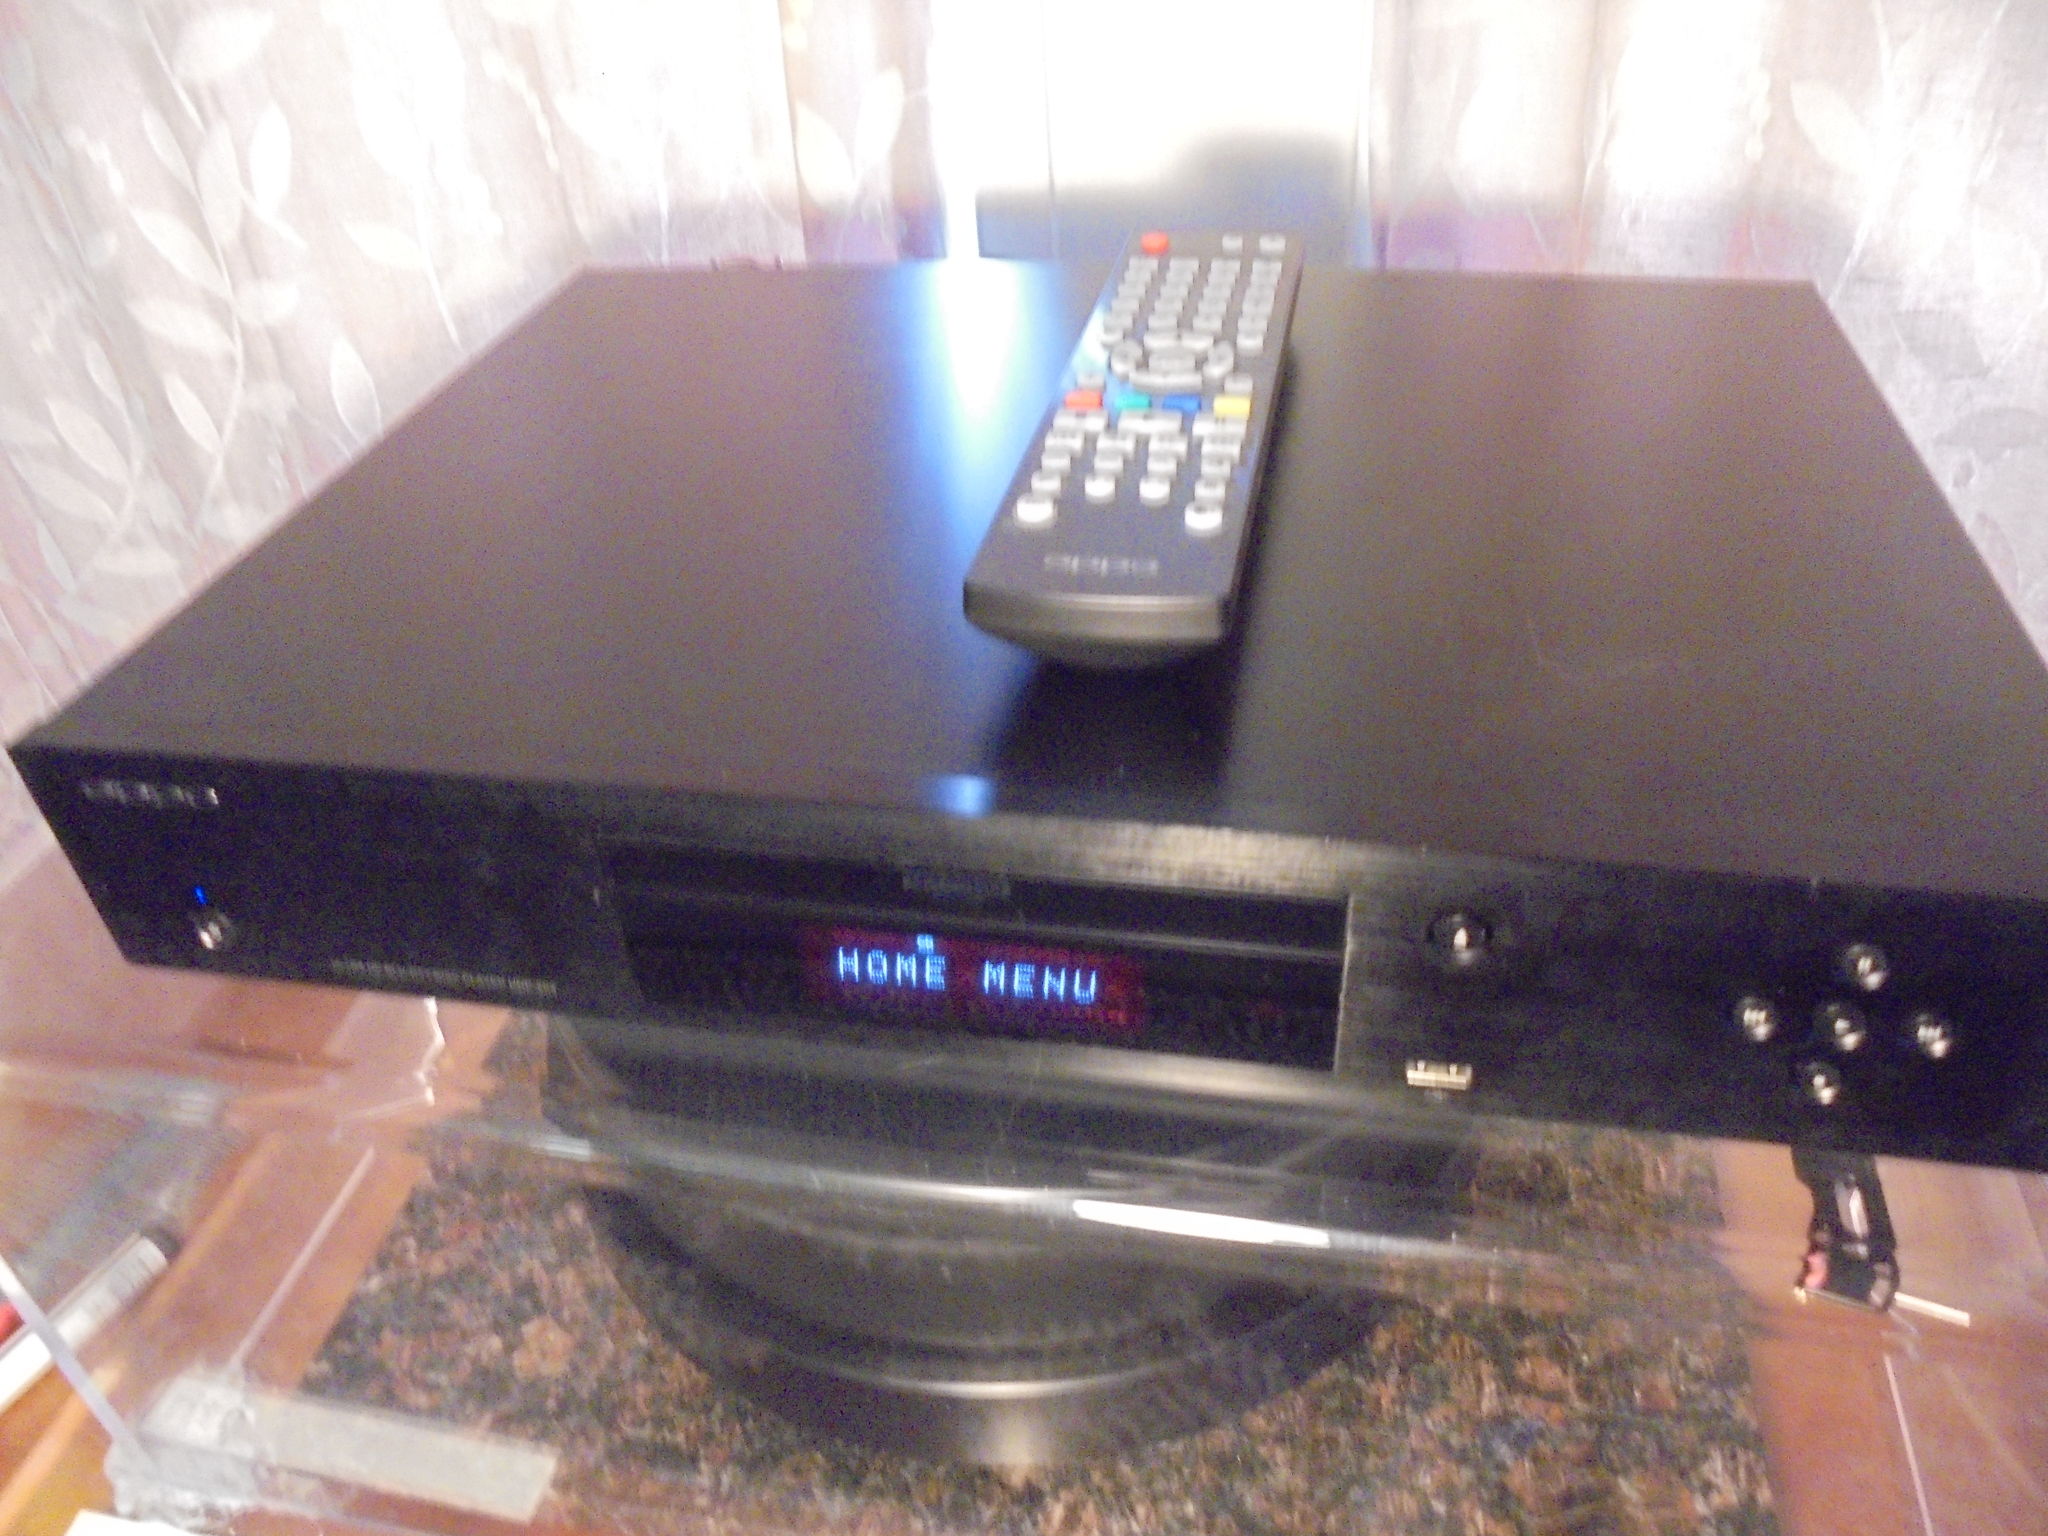 OPPO UPD 203 CD/SACD/ BLUE RAY UNIVERSAL PLAYER 230 VOLT